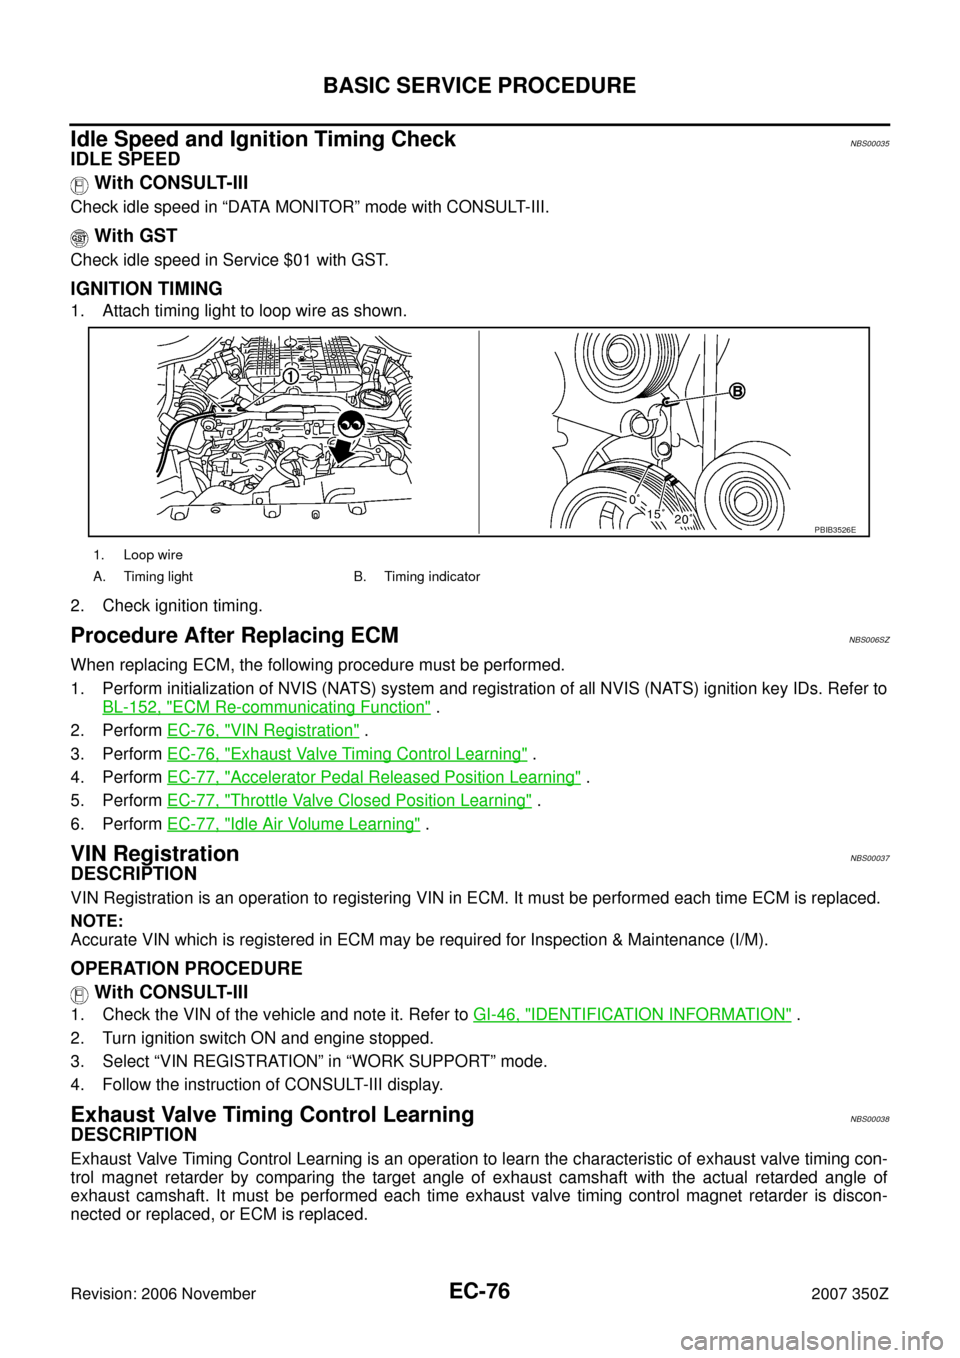 NISSAN 350Z 2007 Z33 Engine Control Manual PDF EC-76
BASIC SERVICE PROCEDURE
Revision: 2006 November2007 350Z
Idle Speed and Ignition Timing CheckNBS00035
IDLE SPEED
 With CONSULT-III
Check idle speed in “DATA MONITOR” mode with CONSULT-III.
 